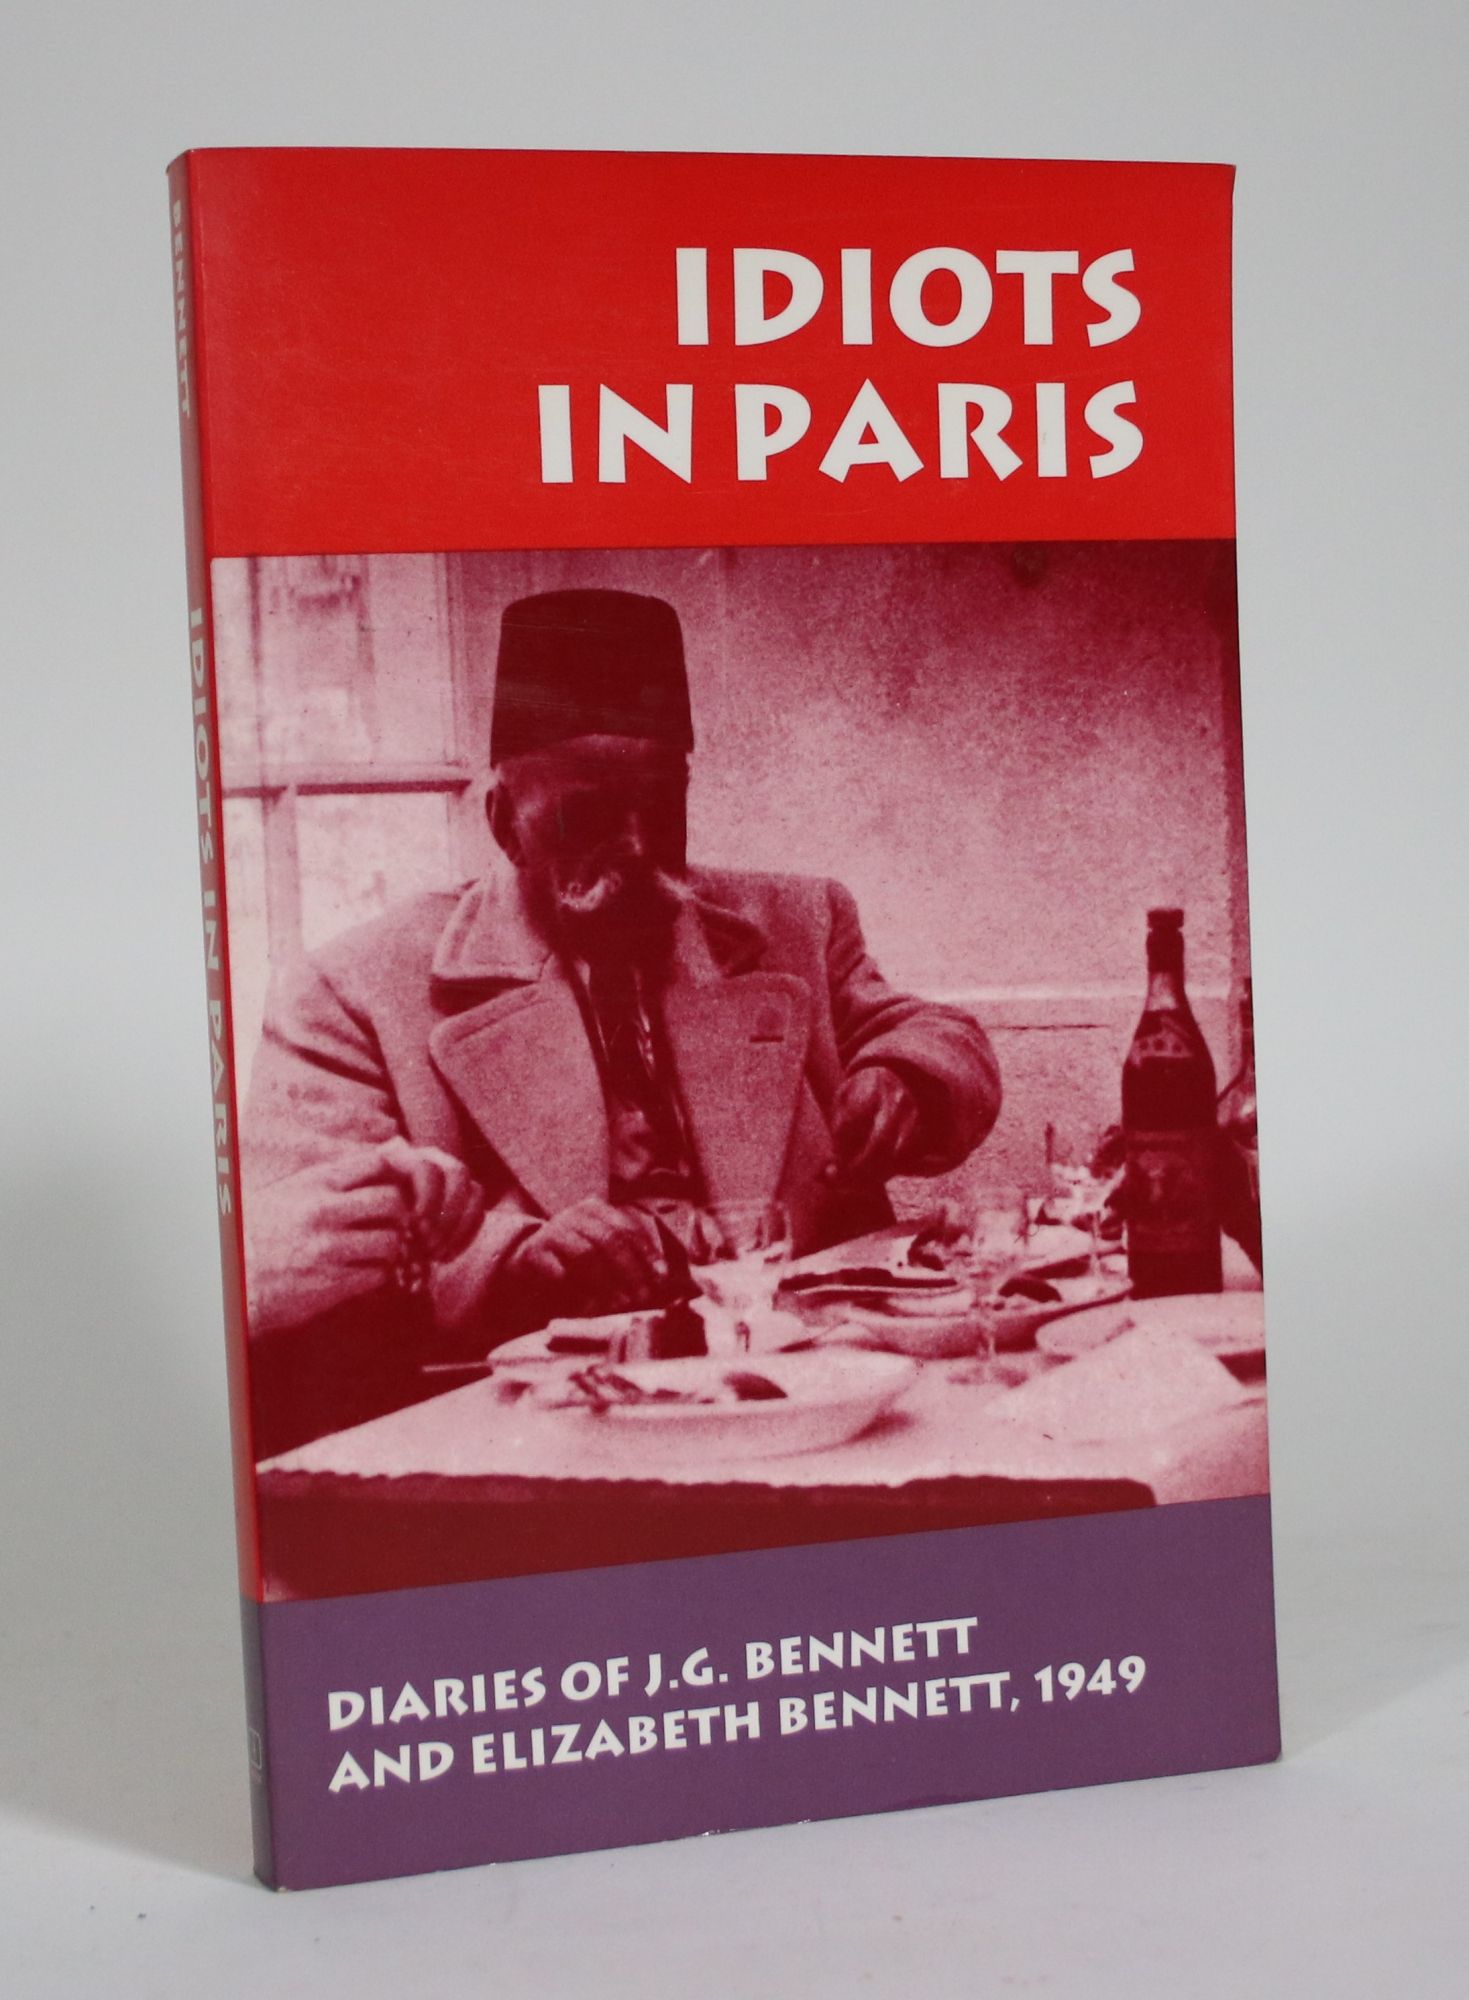 Idiots in Paris: Diaries of J.G. Bennett and Elizabeth Bennett, 1949 - Bennett, J.G. and Elizabeth Bennett